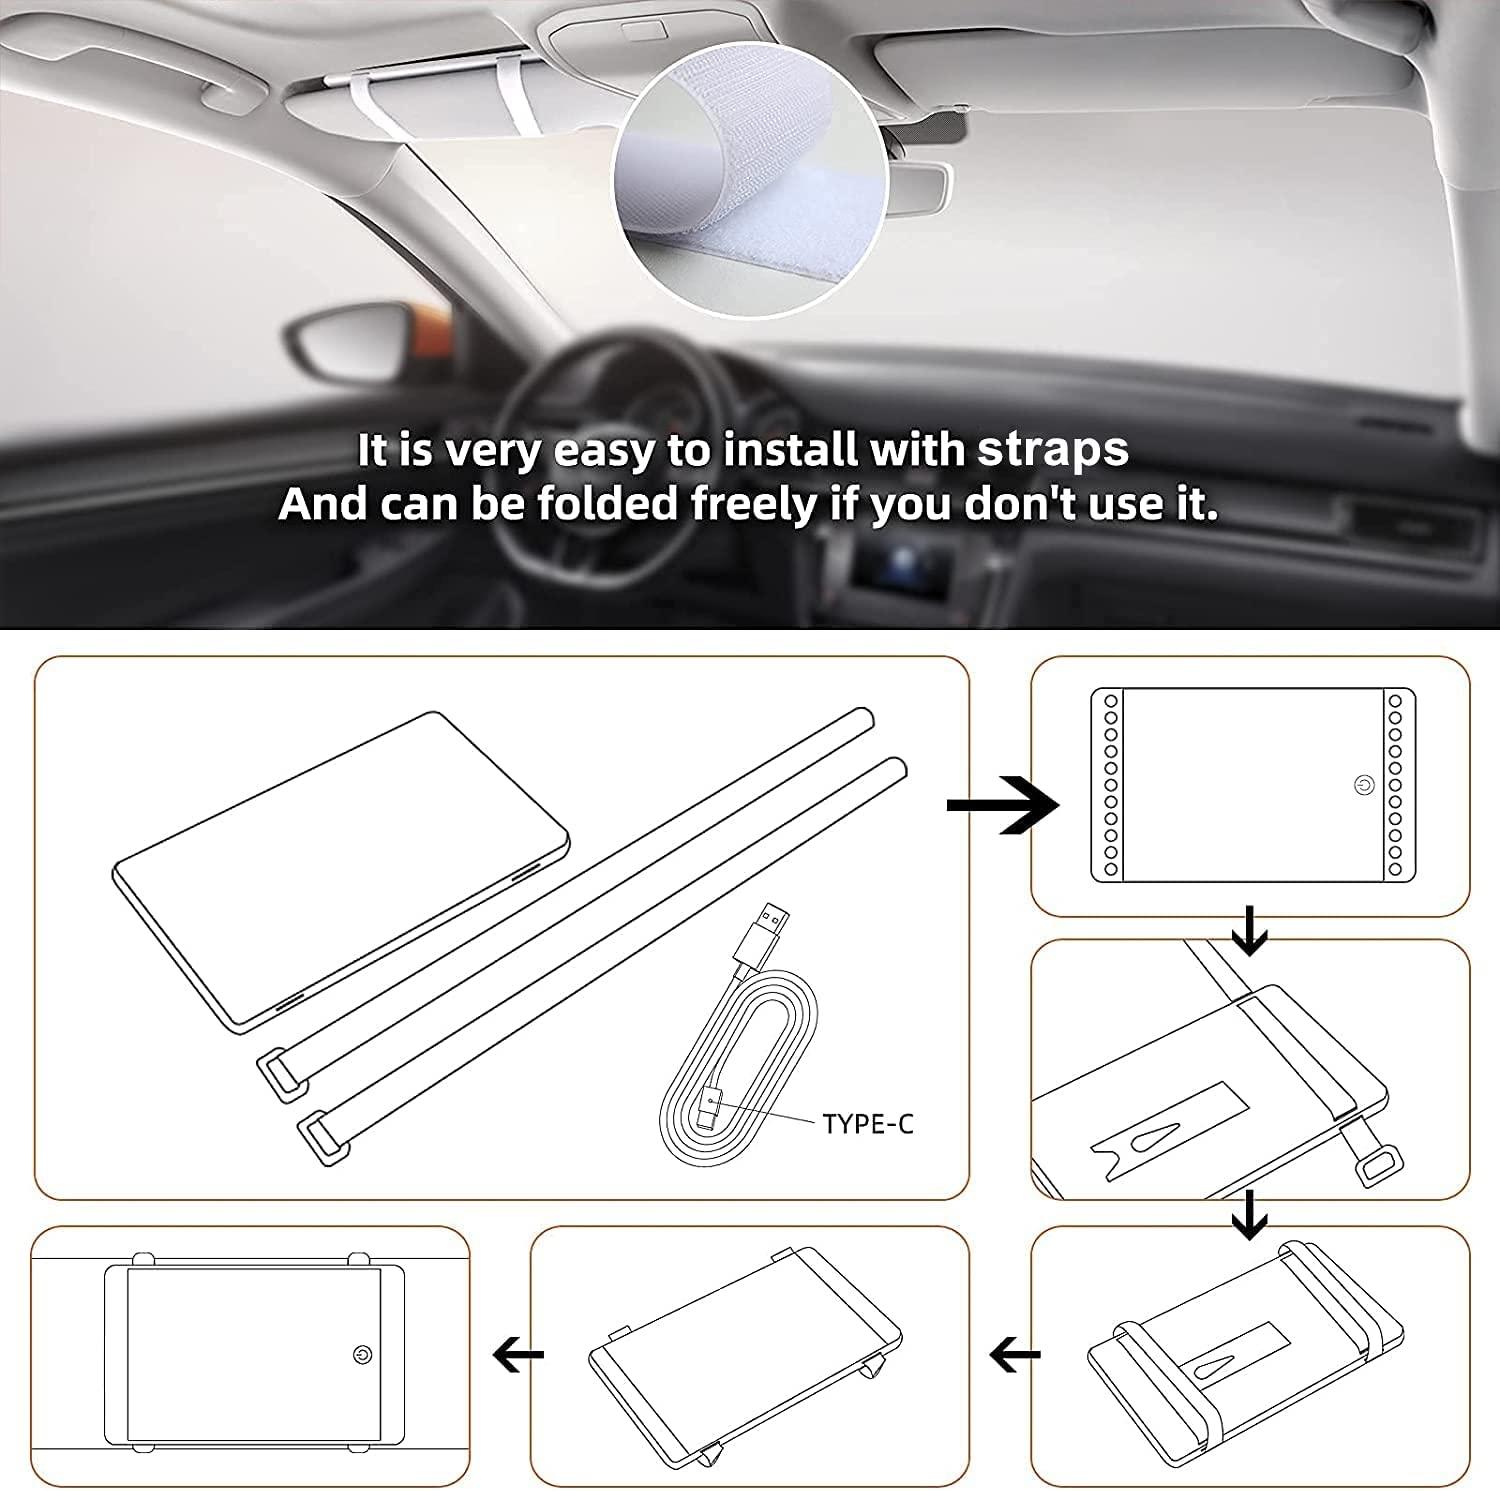 Car Sun Visor Vanity Mirror, Rechargeable Makeup Mirror with 3 Light Modes & 60 LEDs - Dimmable Clip-on Rear View Sun-Shading Cosmetic Mirror with Touch on Screen, Universal for Car Truck SUV - KinglyDay